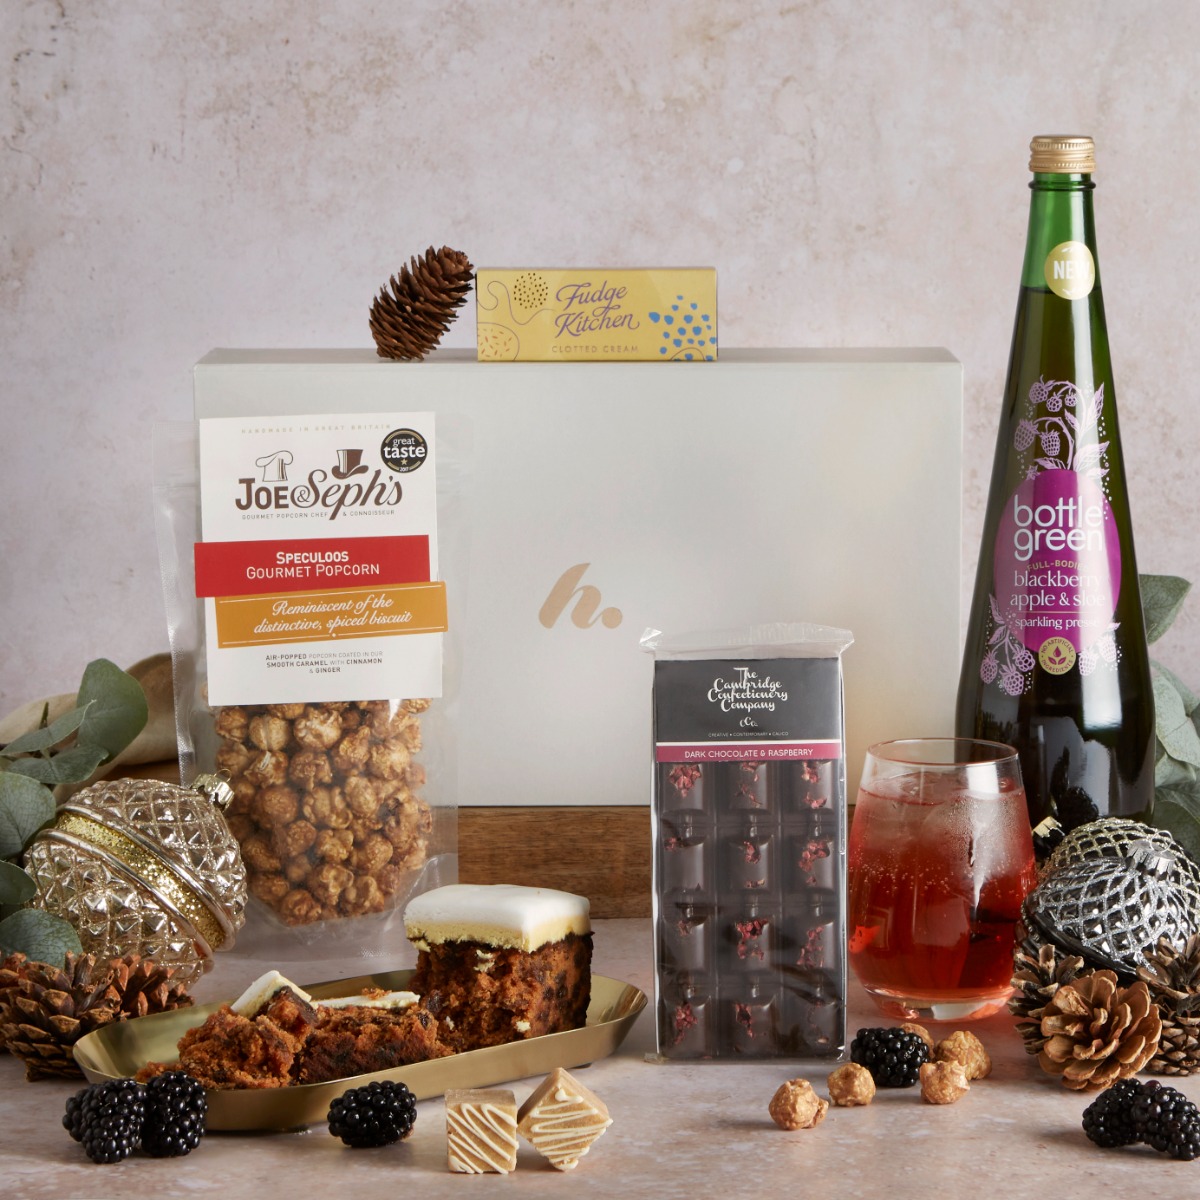 The Festive Flavours Hamper with Christmas contents on display (all of which are gluten free)